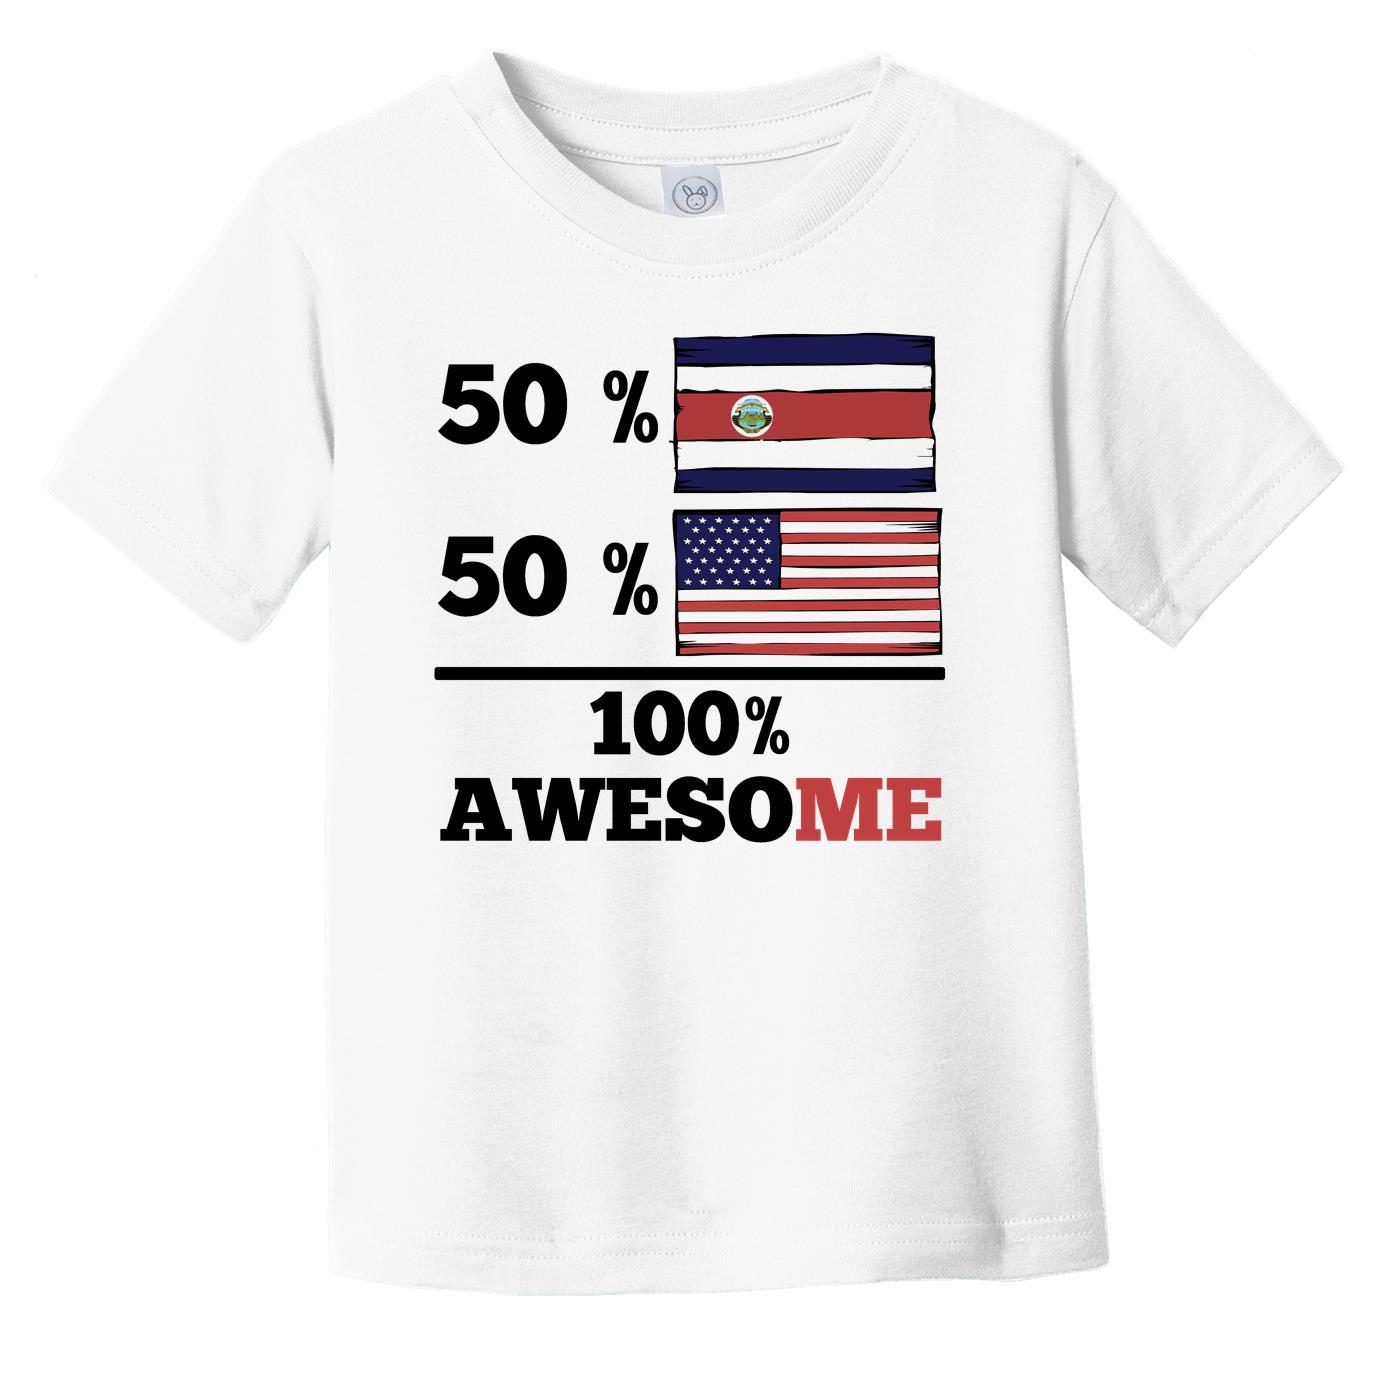 50% Costa Rican 50% American 100% Awesome Infant Toddler T-Shirt